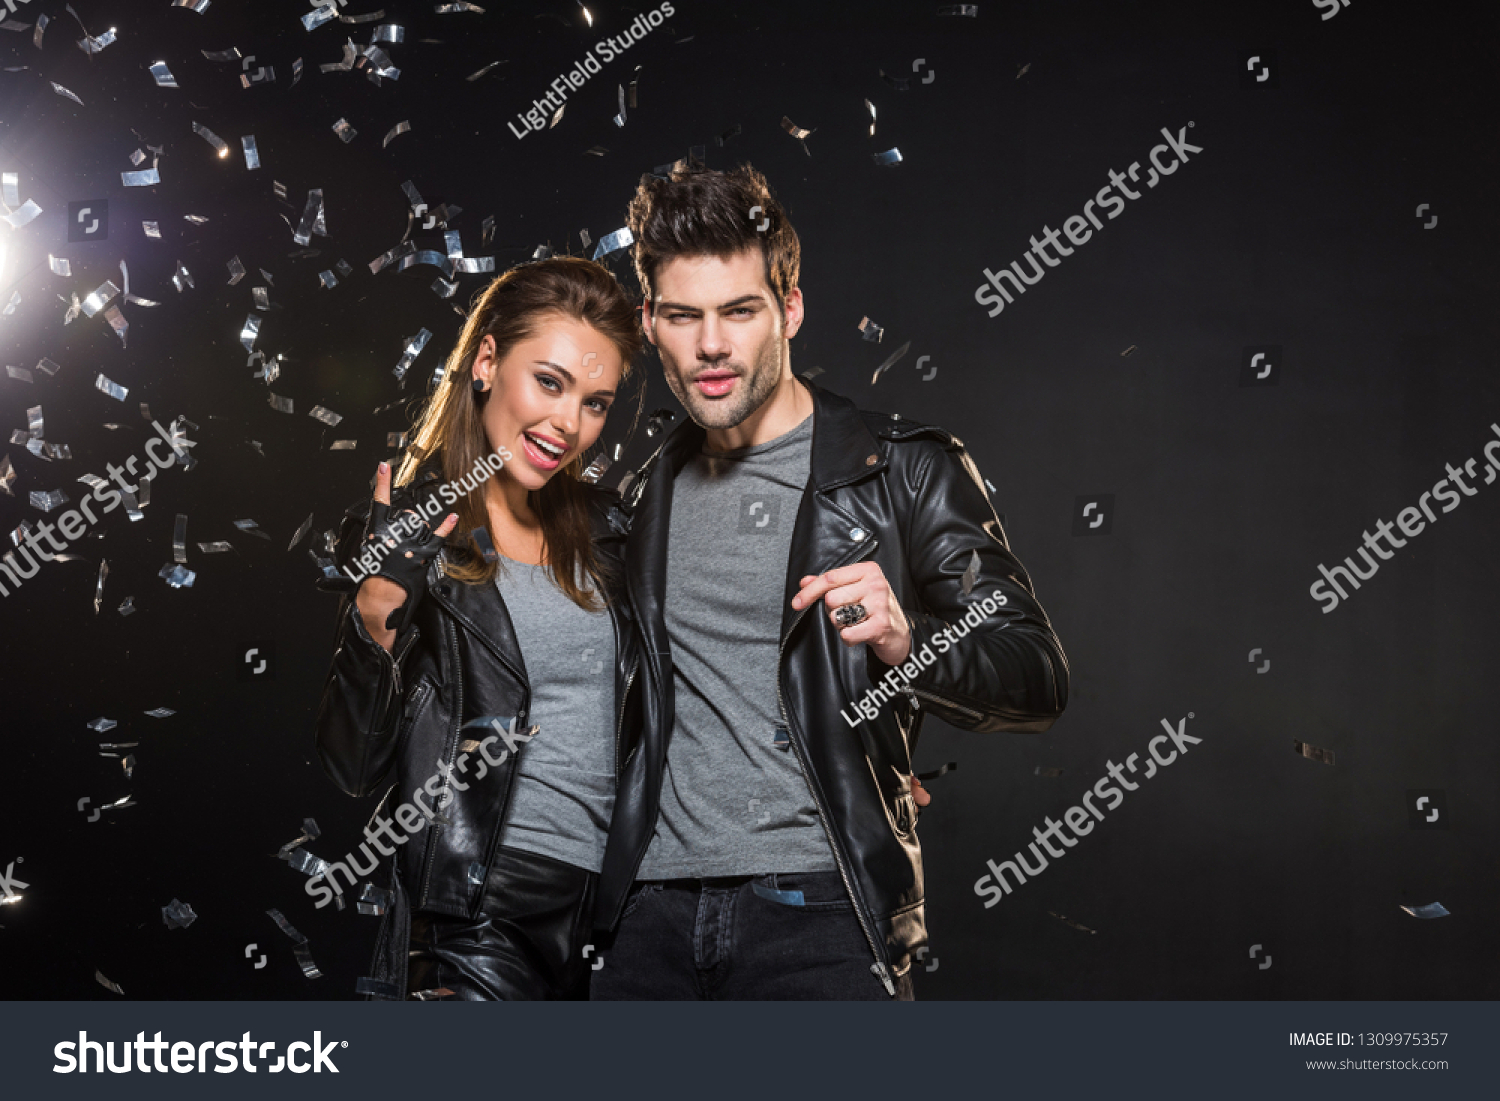 beautiful couple in leather jackets cheering and looking at camera with falling confetti on black background #1309975357